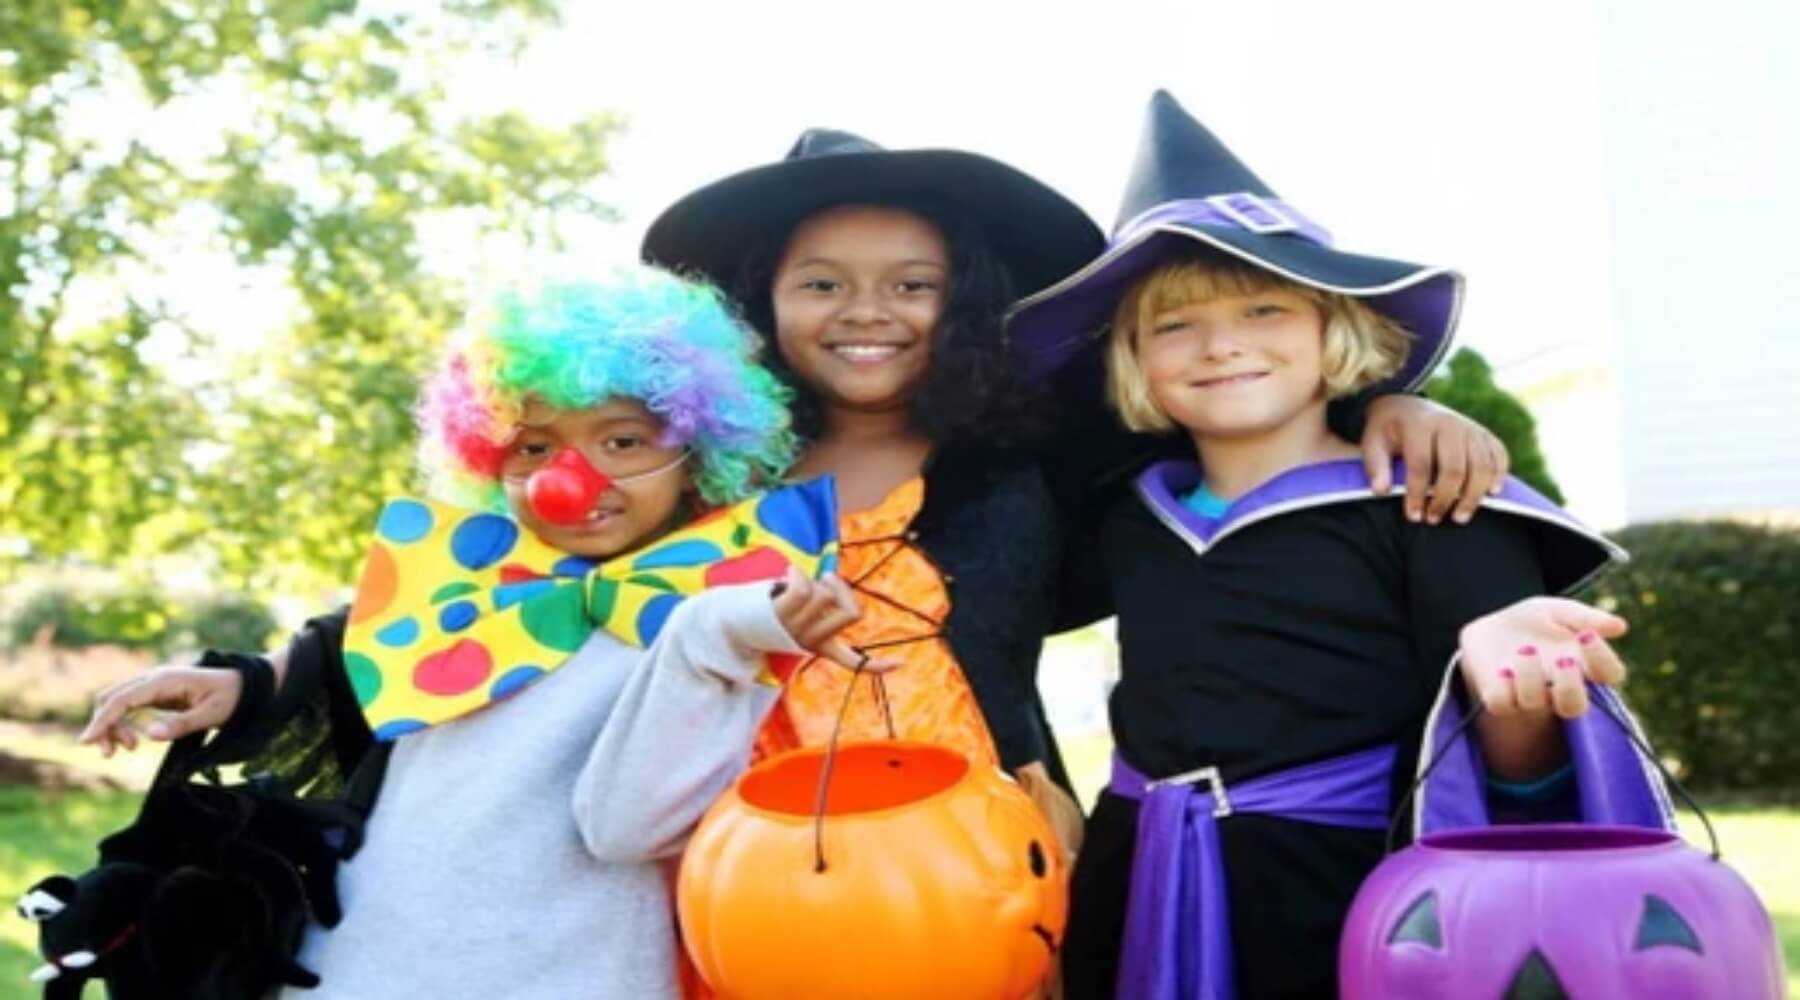 Looking for fun, spooky activities to do with your elementary students this Halloween? We've got you covered with these 8 great ideas.